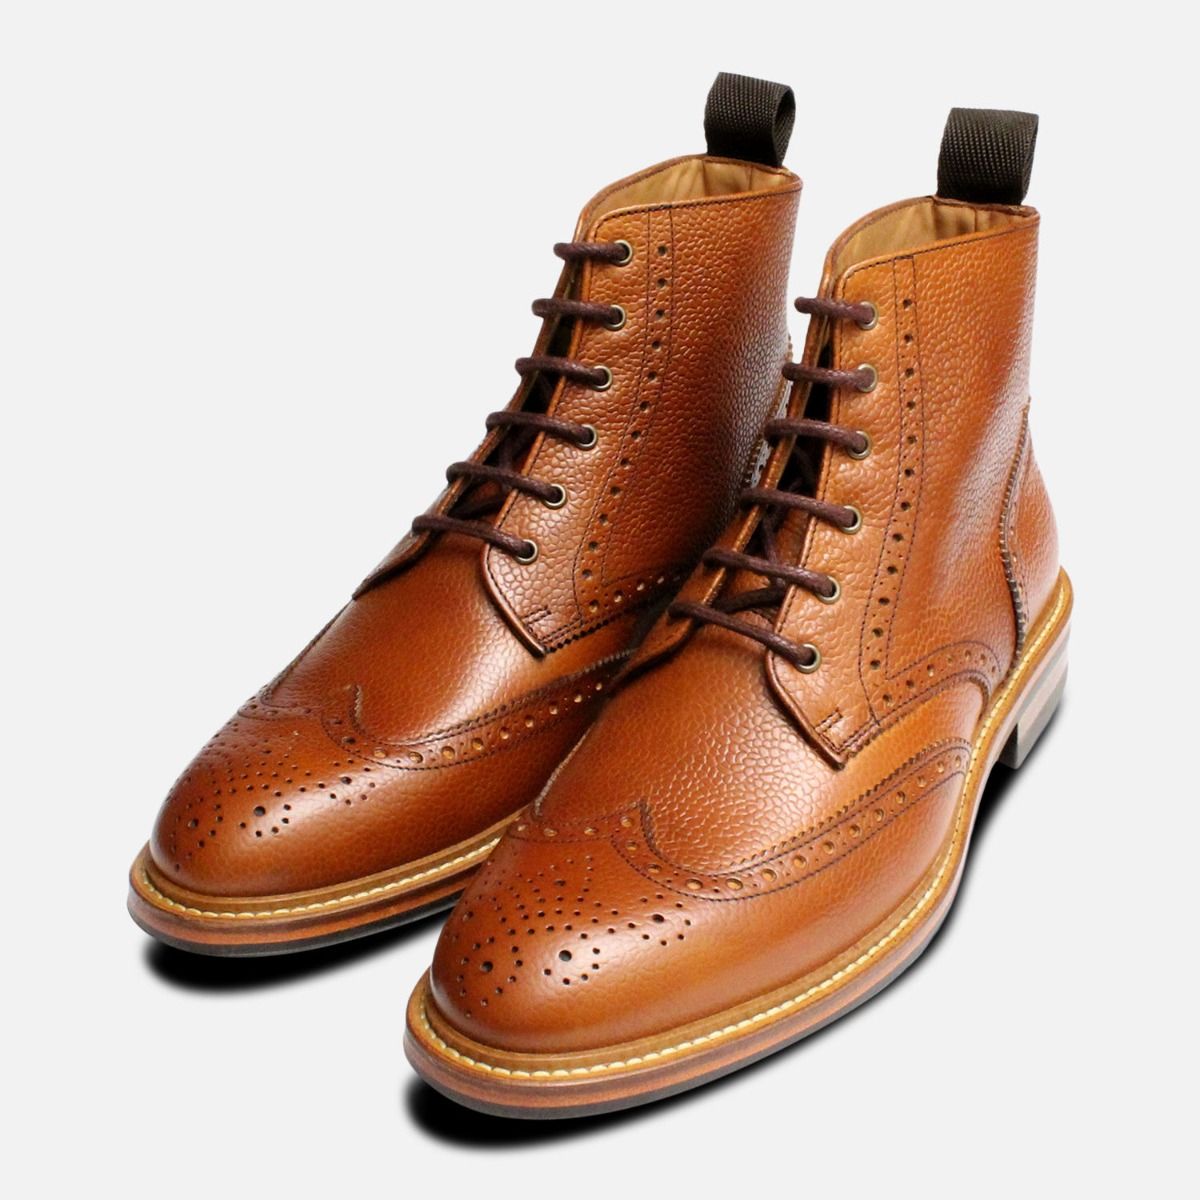 Country Brogue Boots in Tan Grain